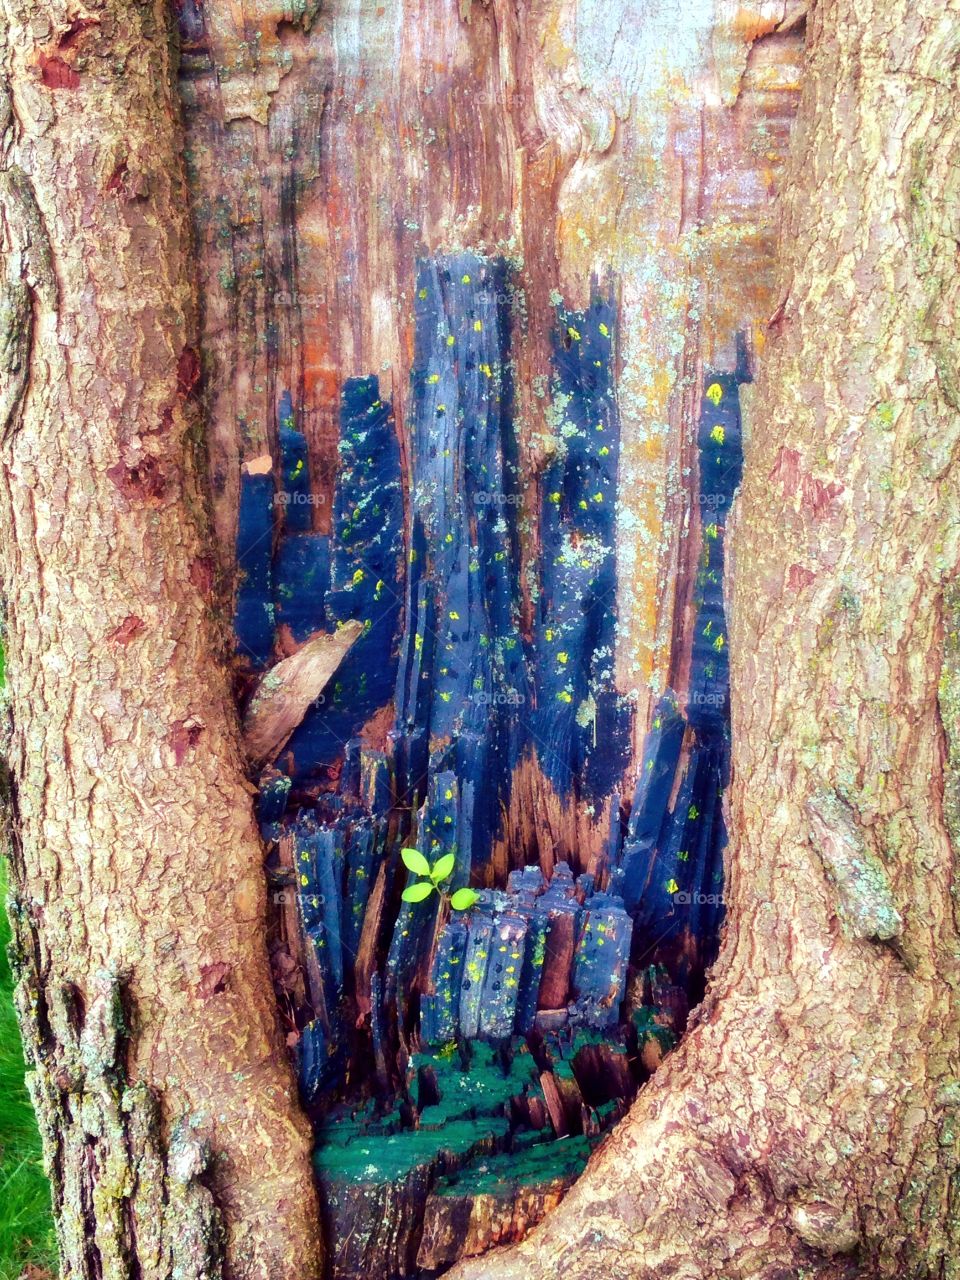 Art on alive tree. Found this on a tree near a walking path